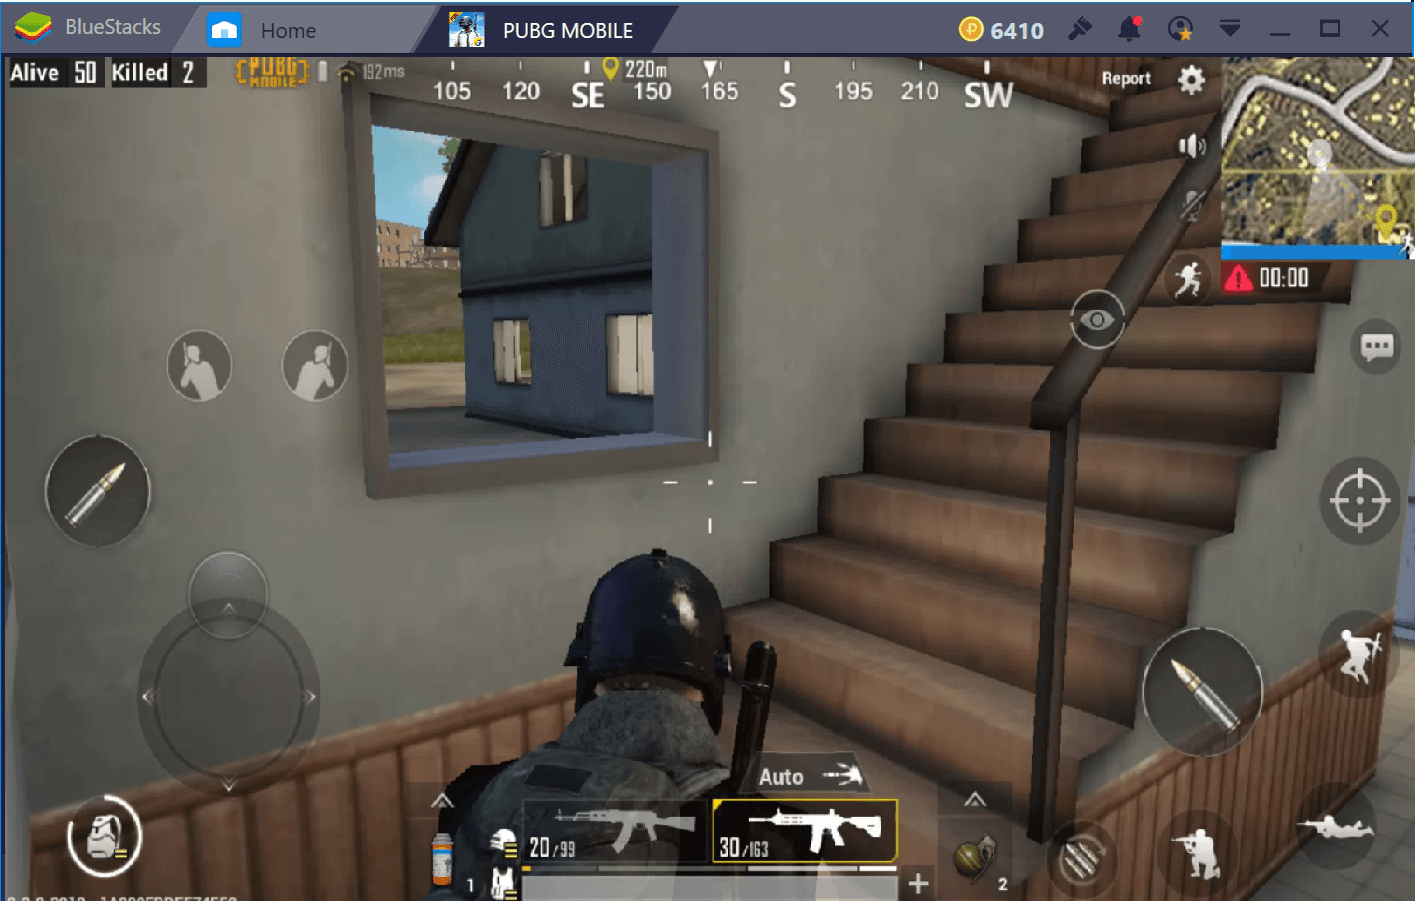 PUBG Mobile : Quick Tips For Becoming A Better Player